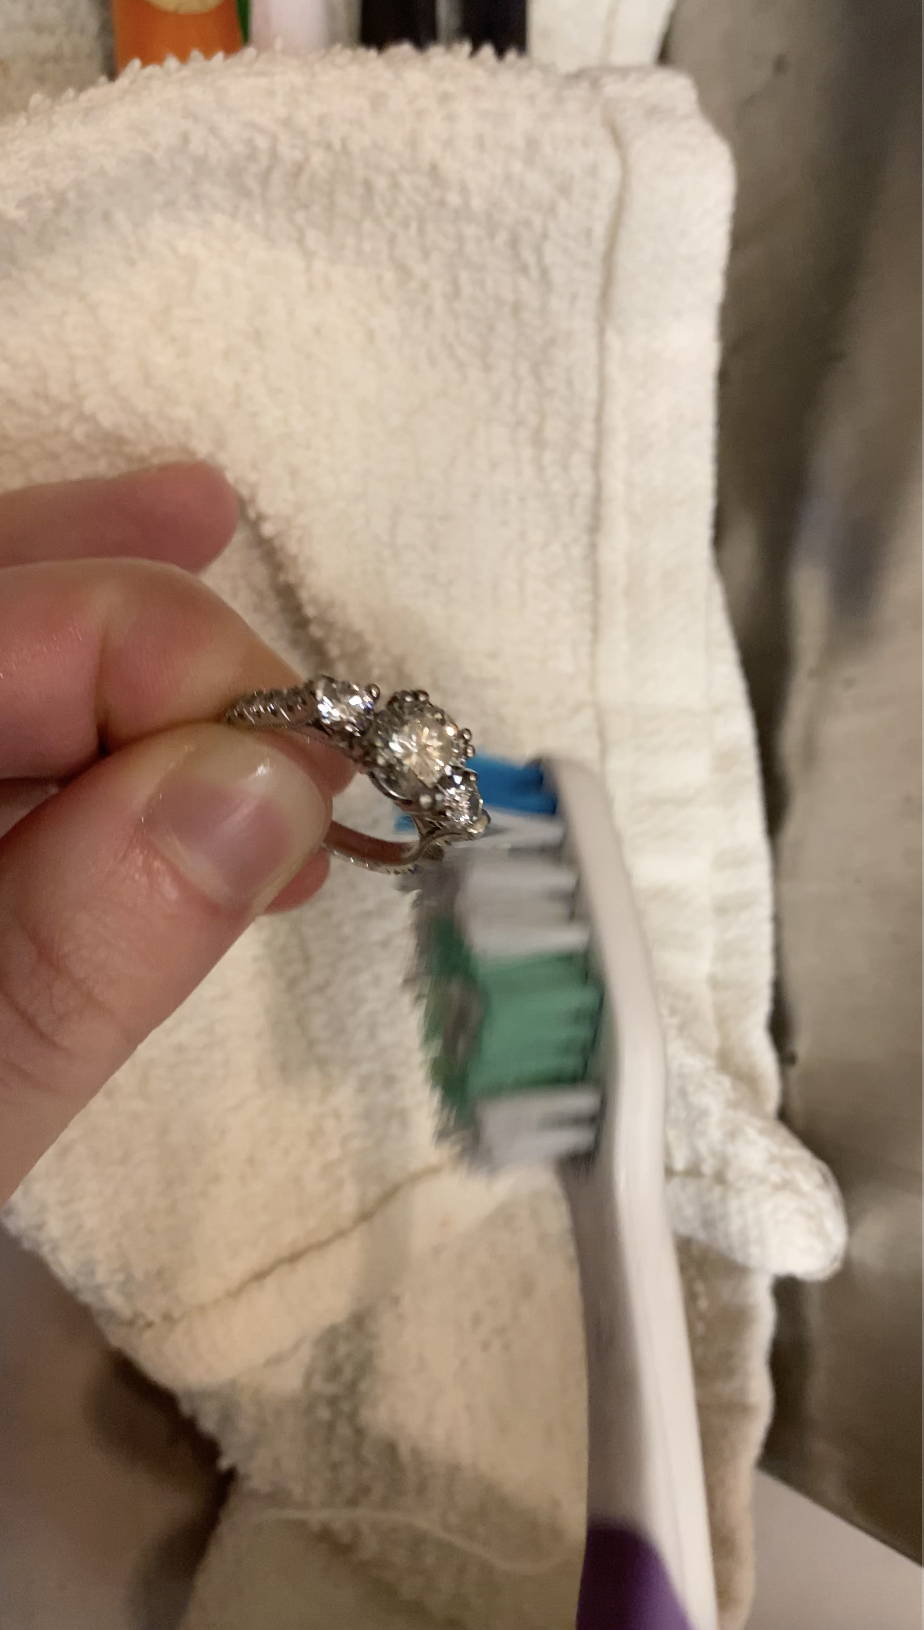 Diamond ring being cleaned